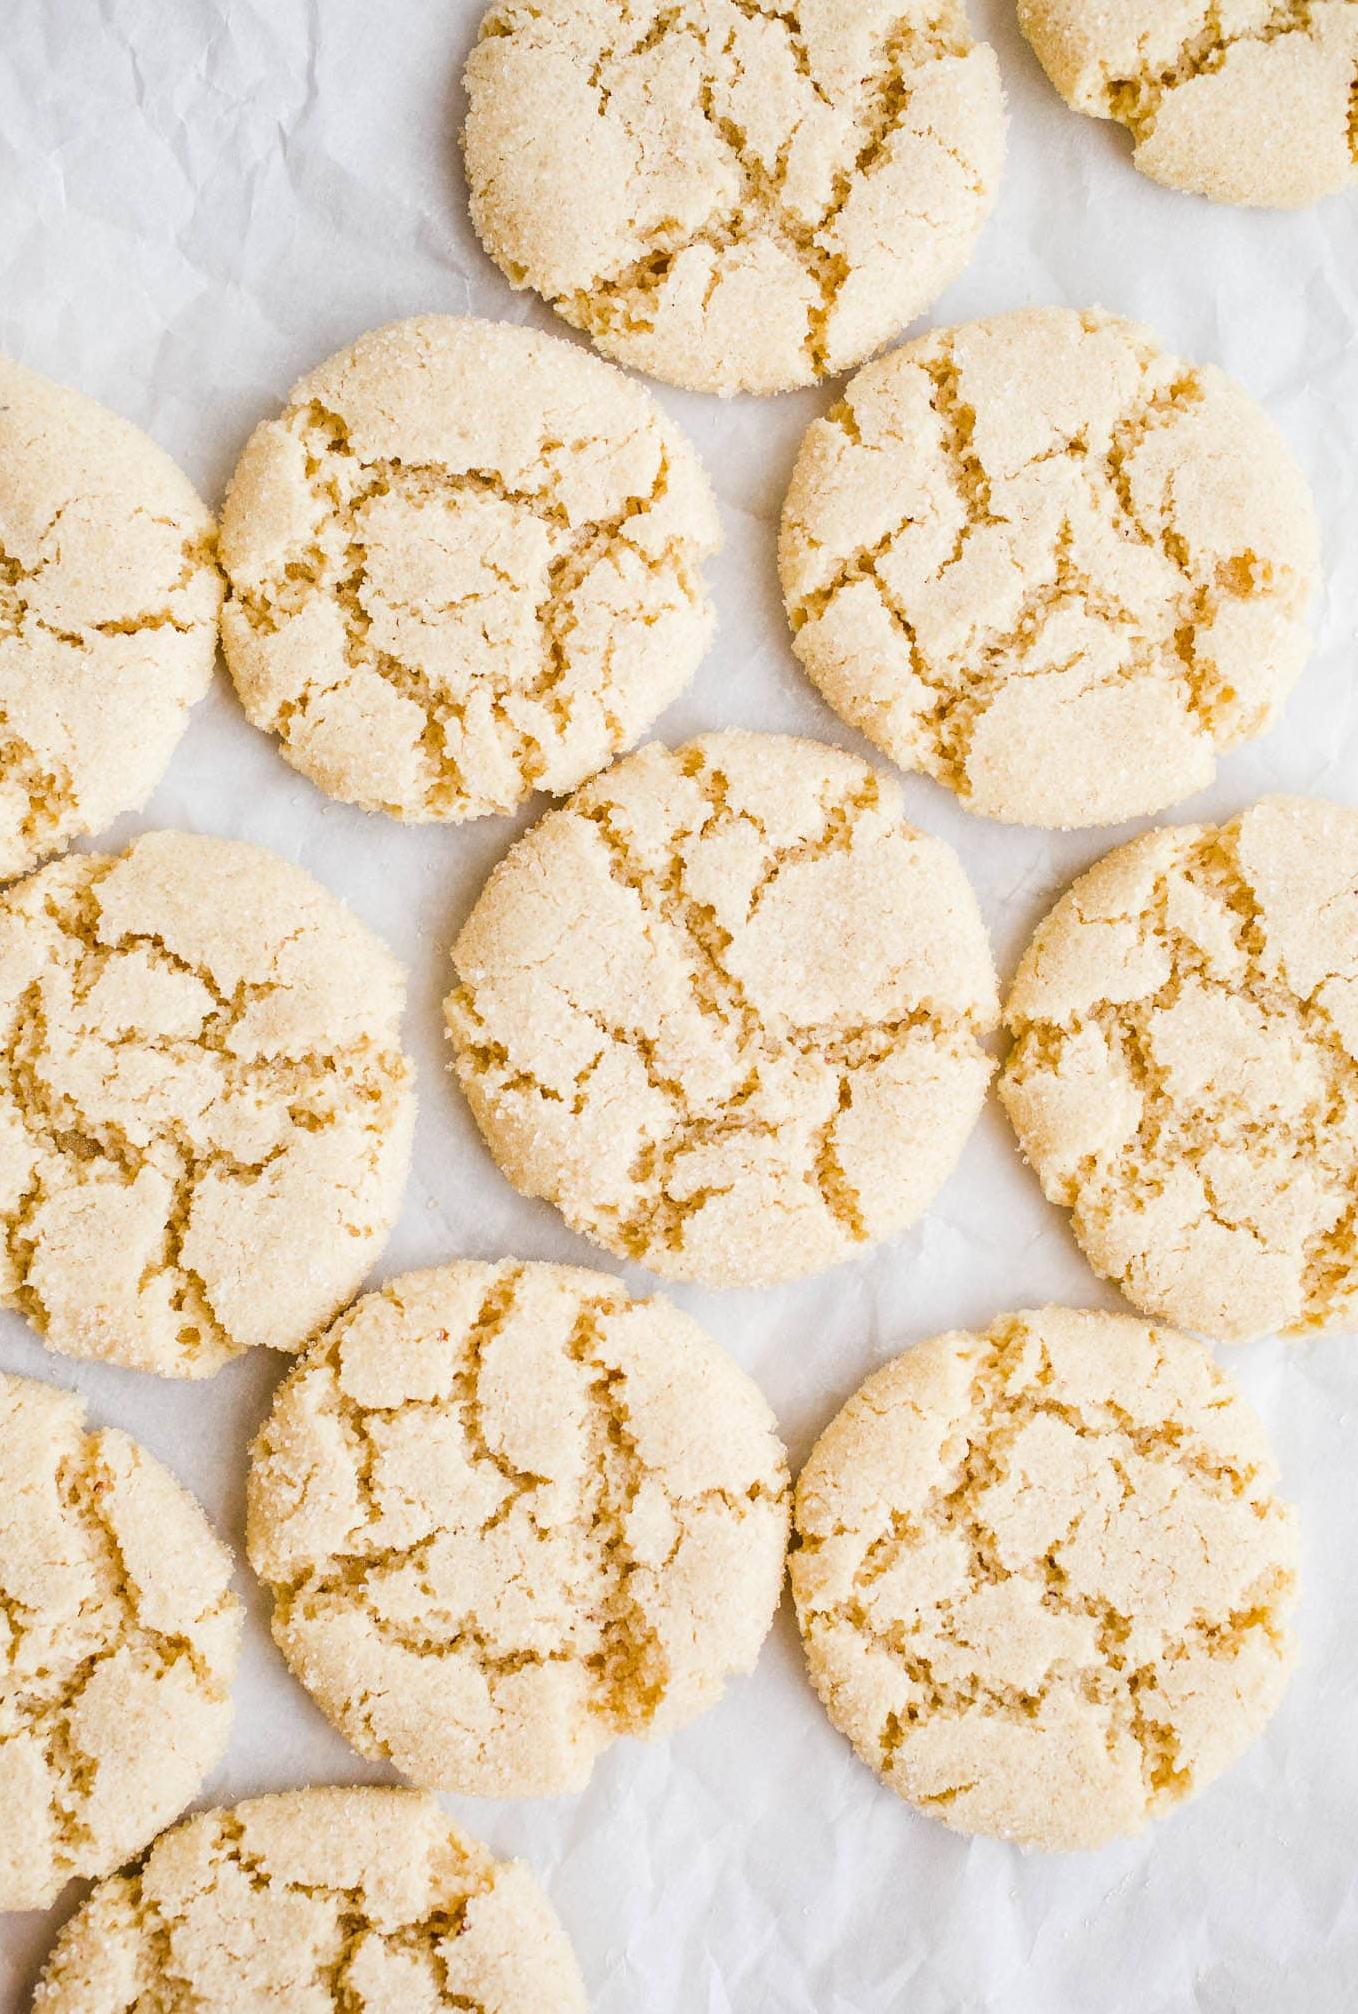  Perfect for an afternoon snack or dessert, these cookies hit the spot.